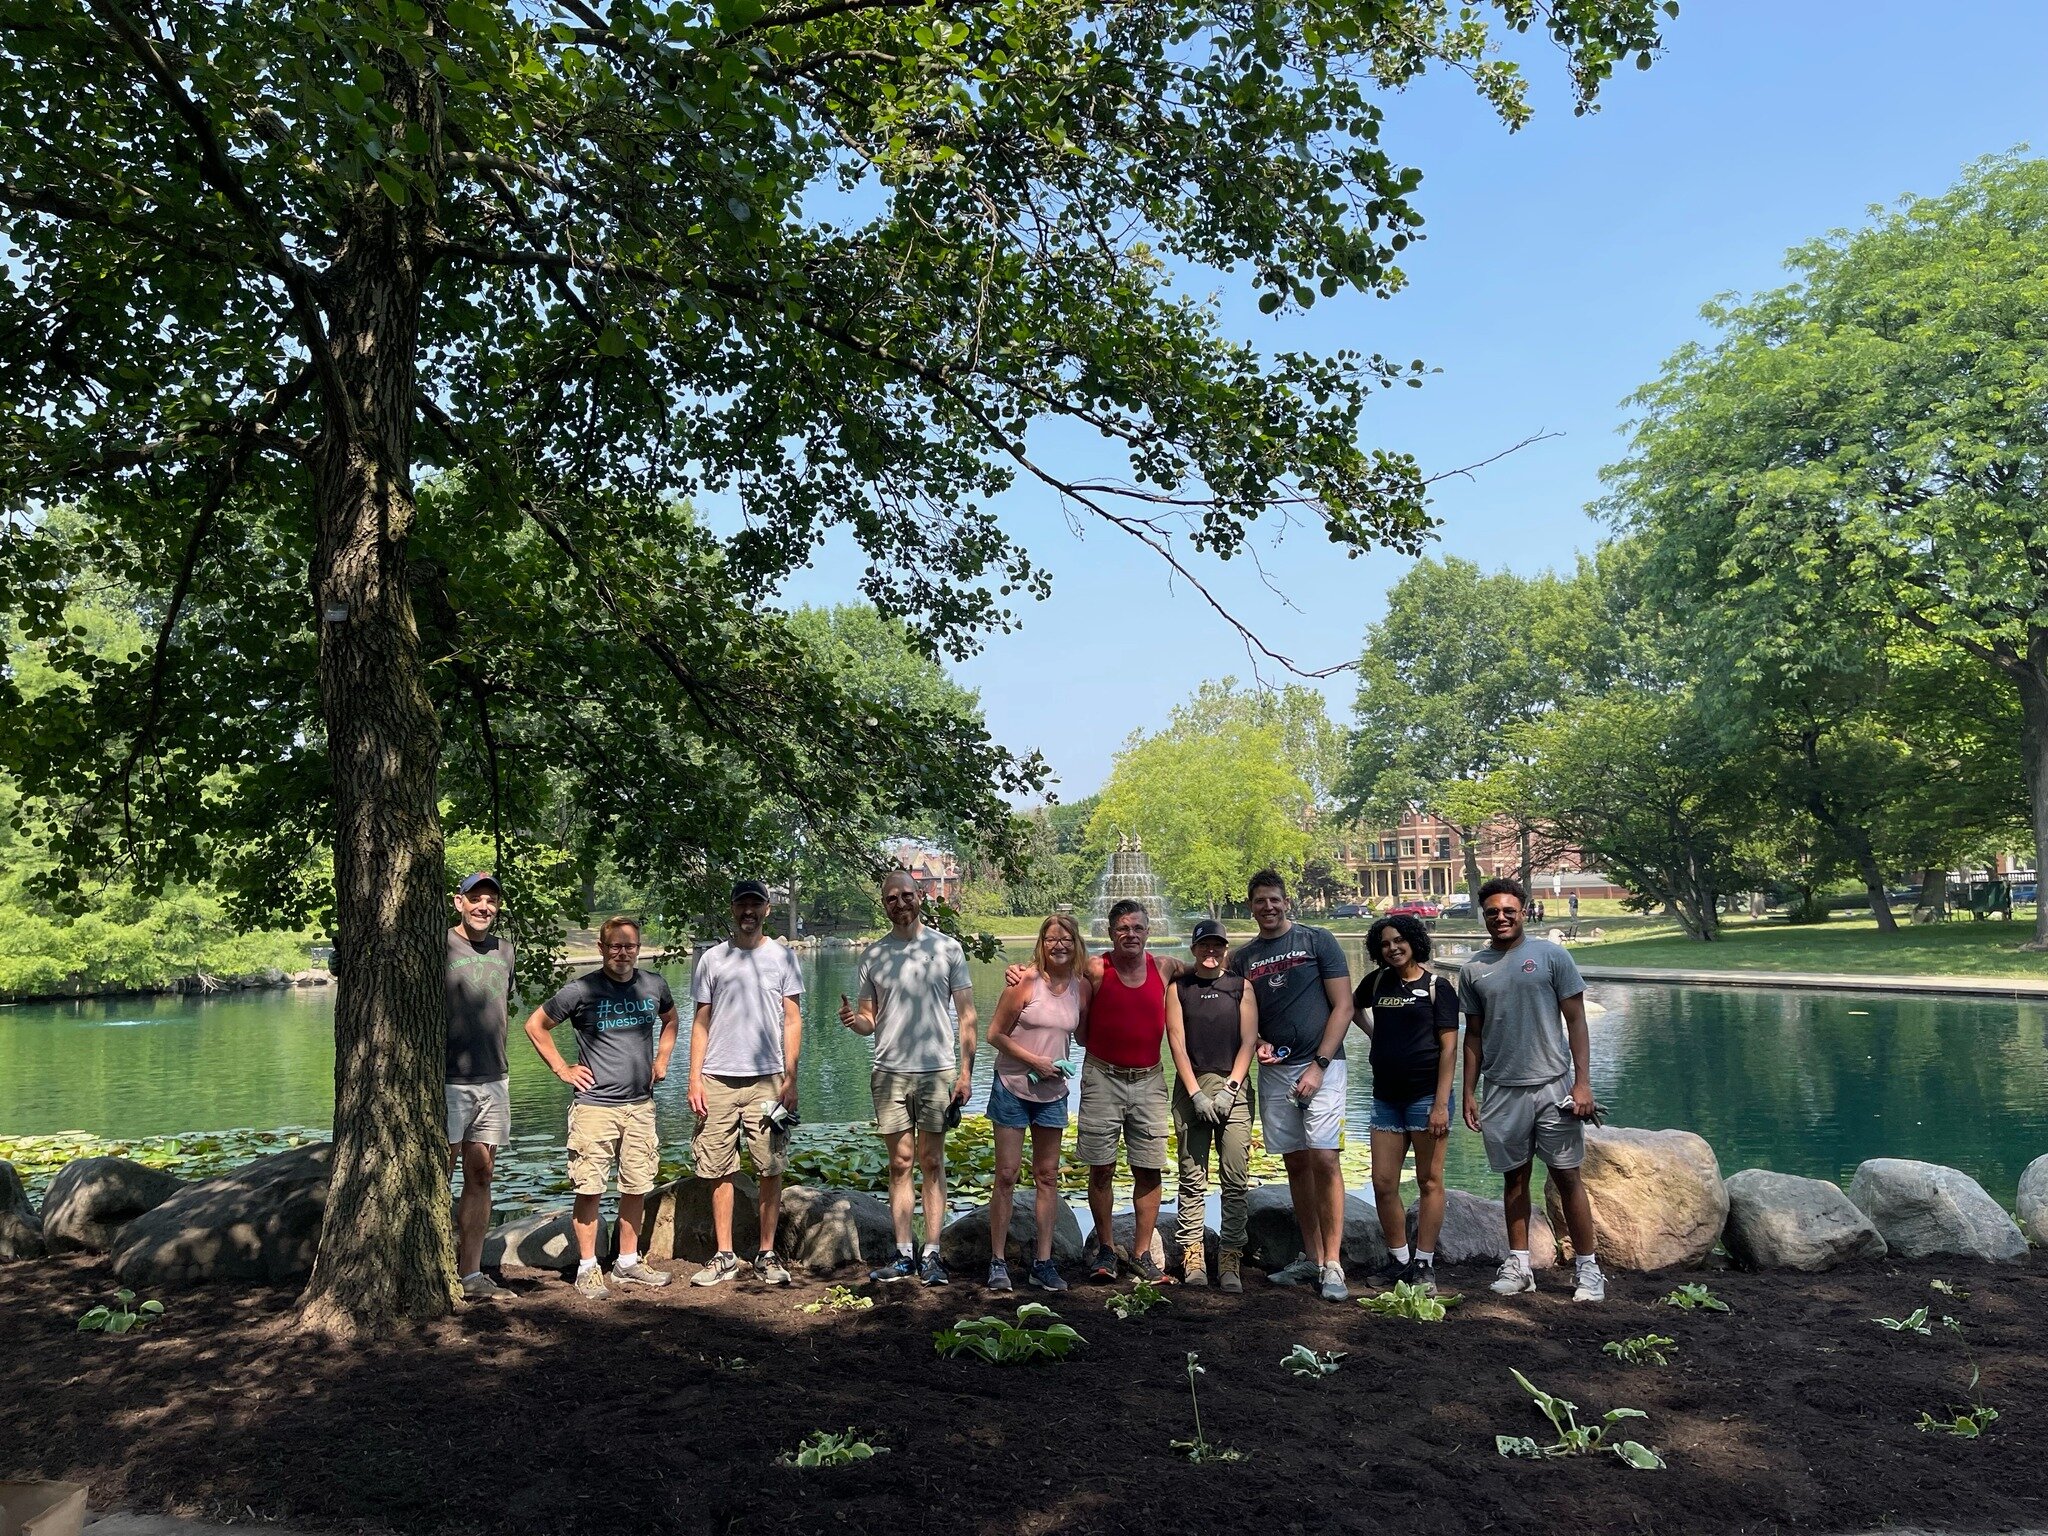 We ❤ volunteering with Friends of Goodale Park! On Saturday, we weeded, watered, and picked up litter to help keep Goodale Park looking beautiful. Huge thanks to @Donatos Pizza for throwing a 🍕 party for the volunteers, too!